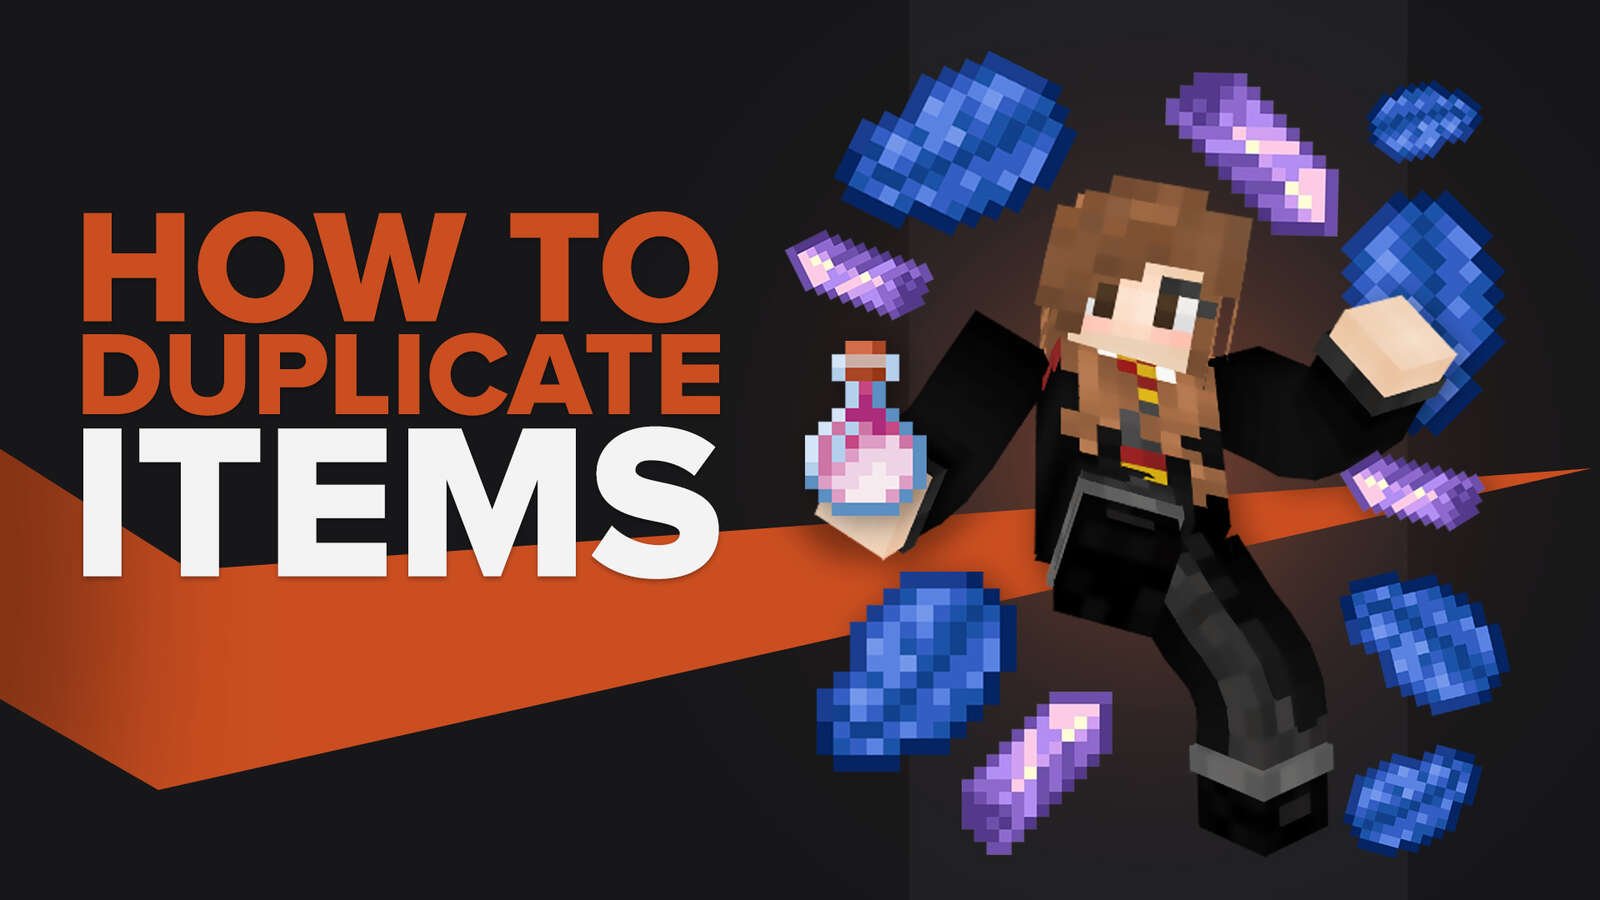 4 Methods To Duplicate Items in Minecraft